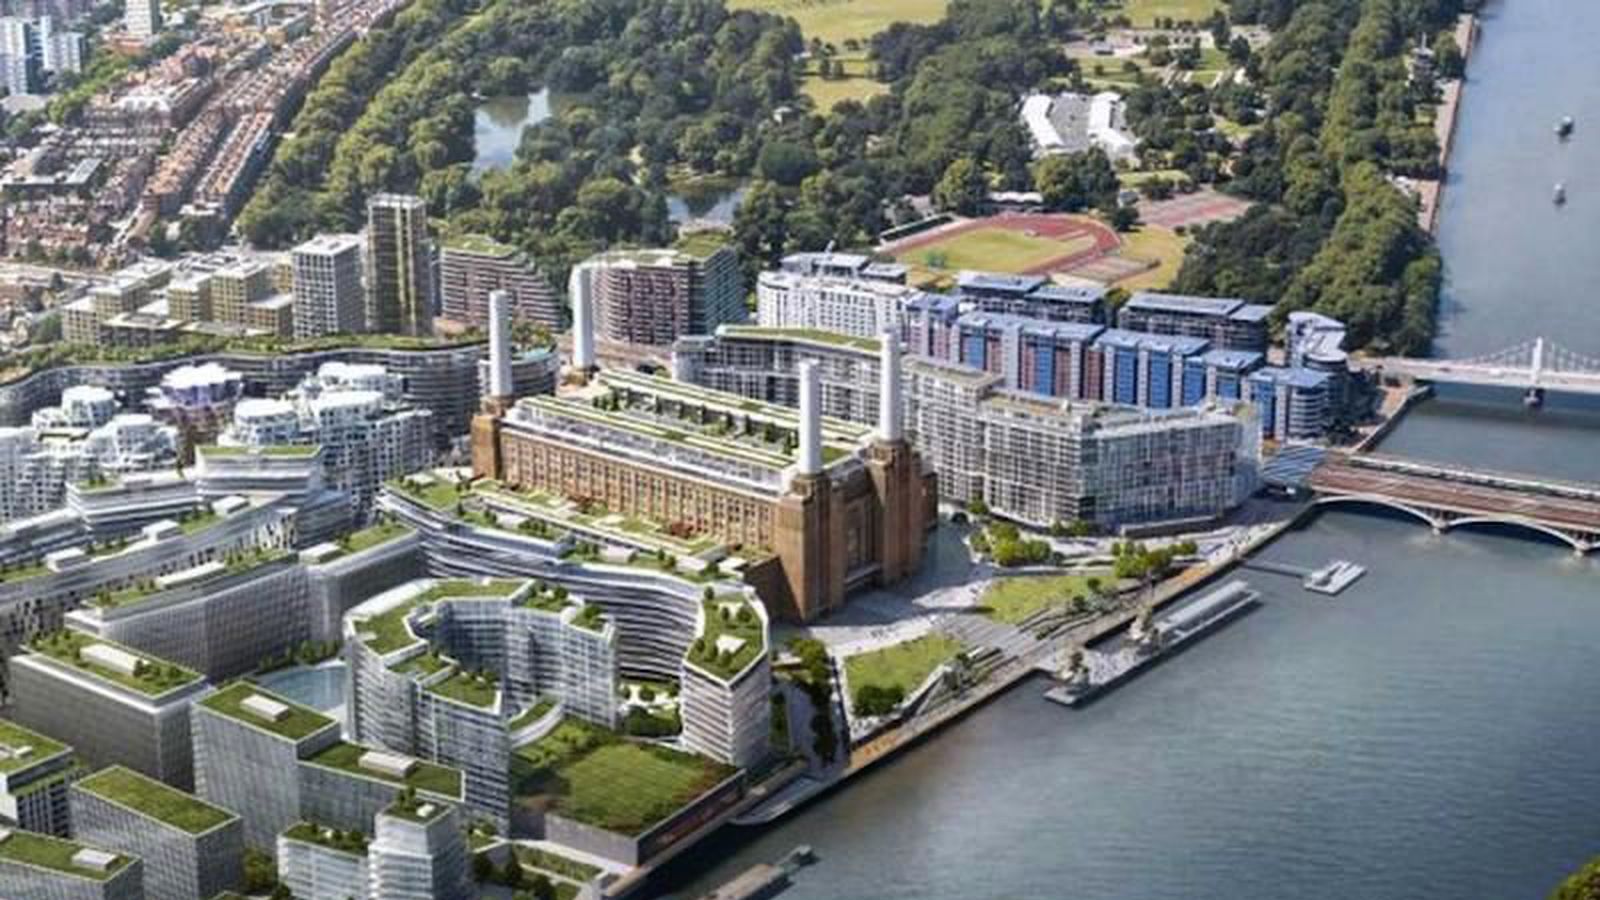 New Apple Campus in London's Battersea Power Station to Open in Early 2023  - MacRumors